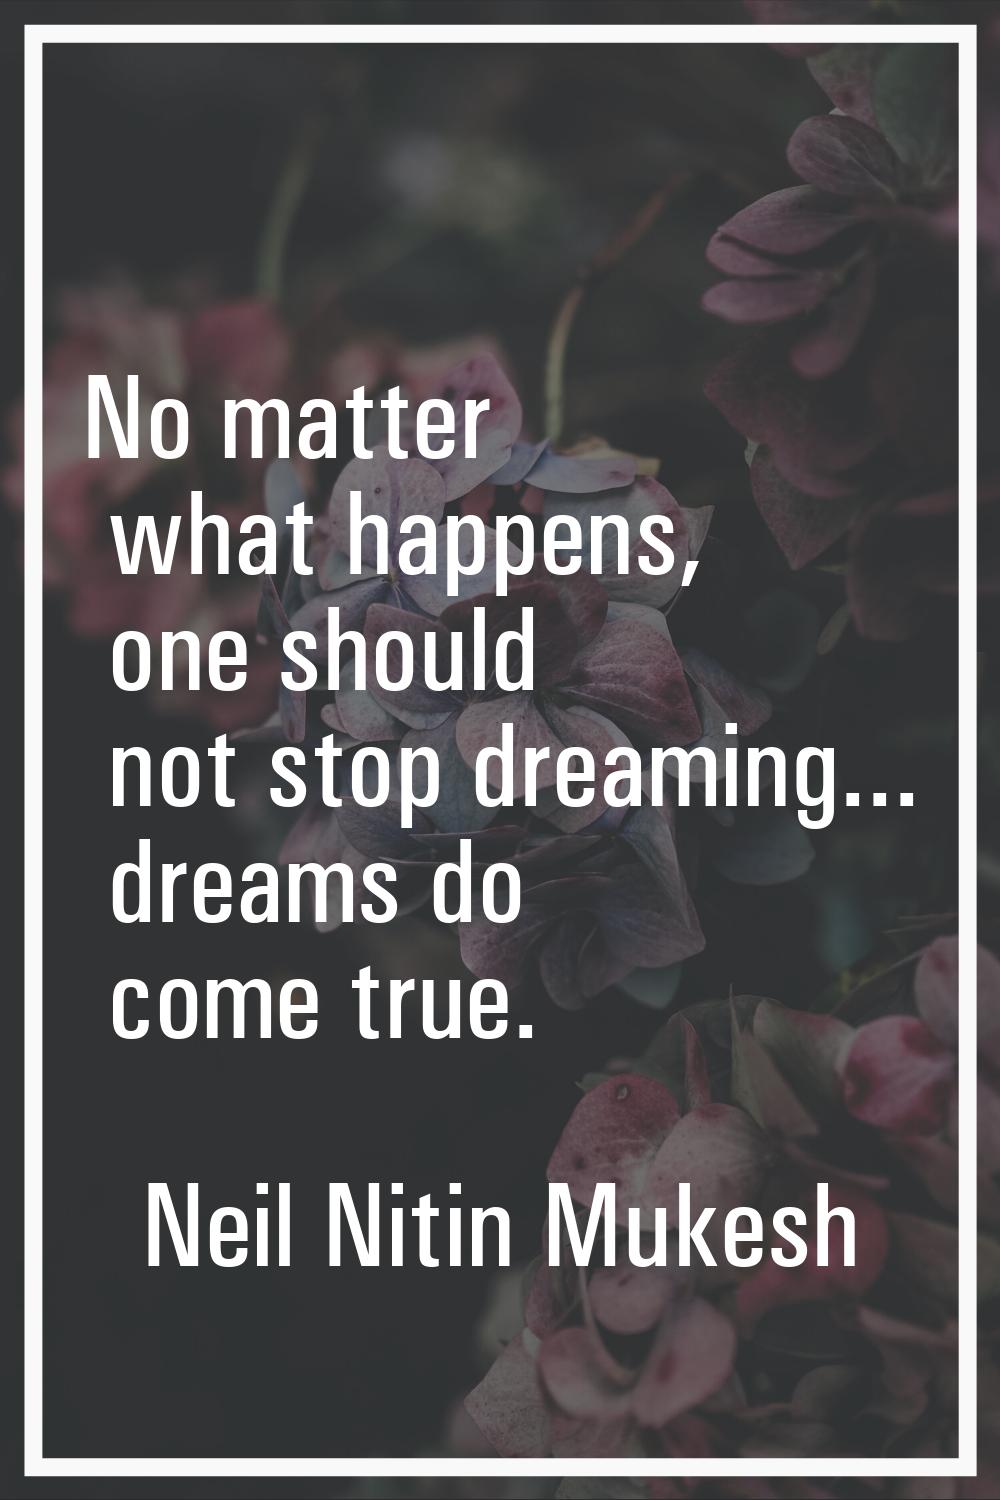 No matter what happens, one should not stop dreaming... dreams do come true.